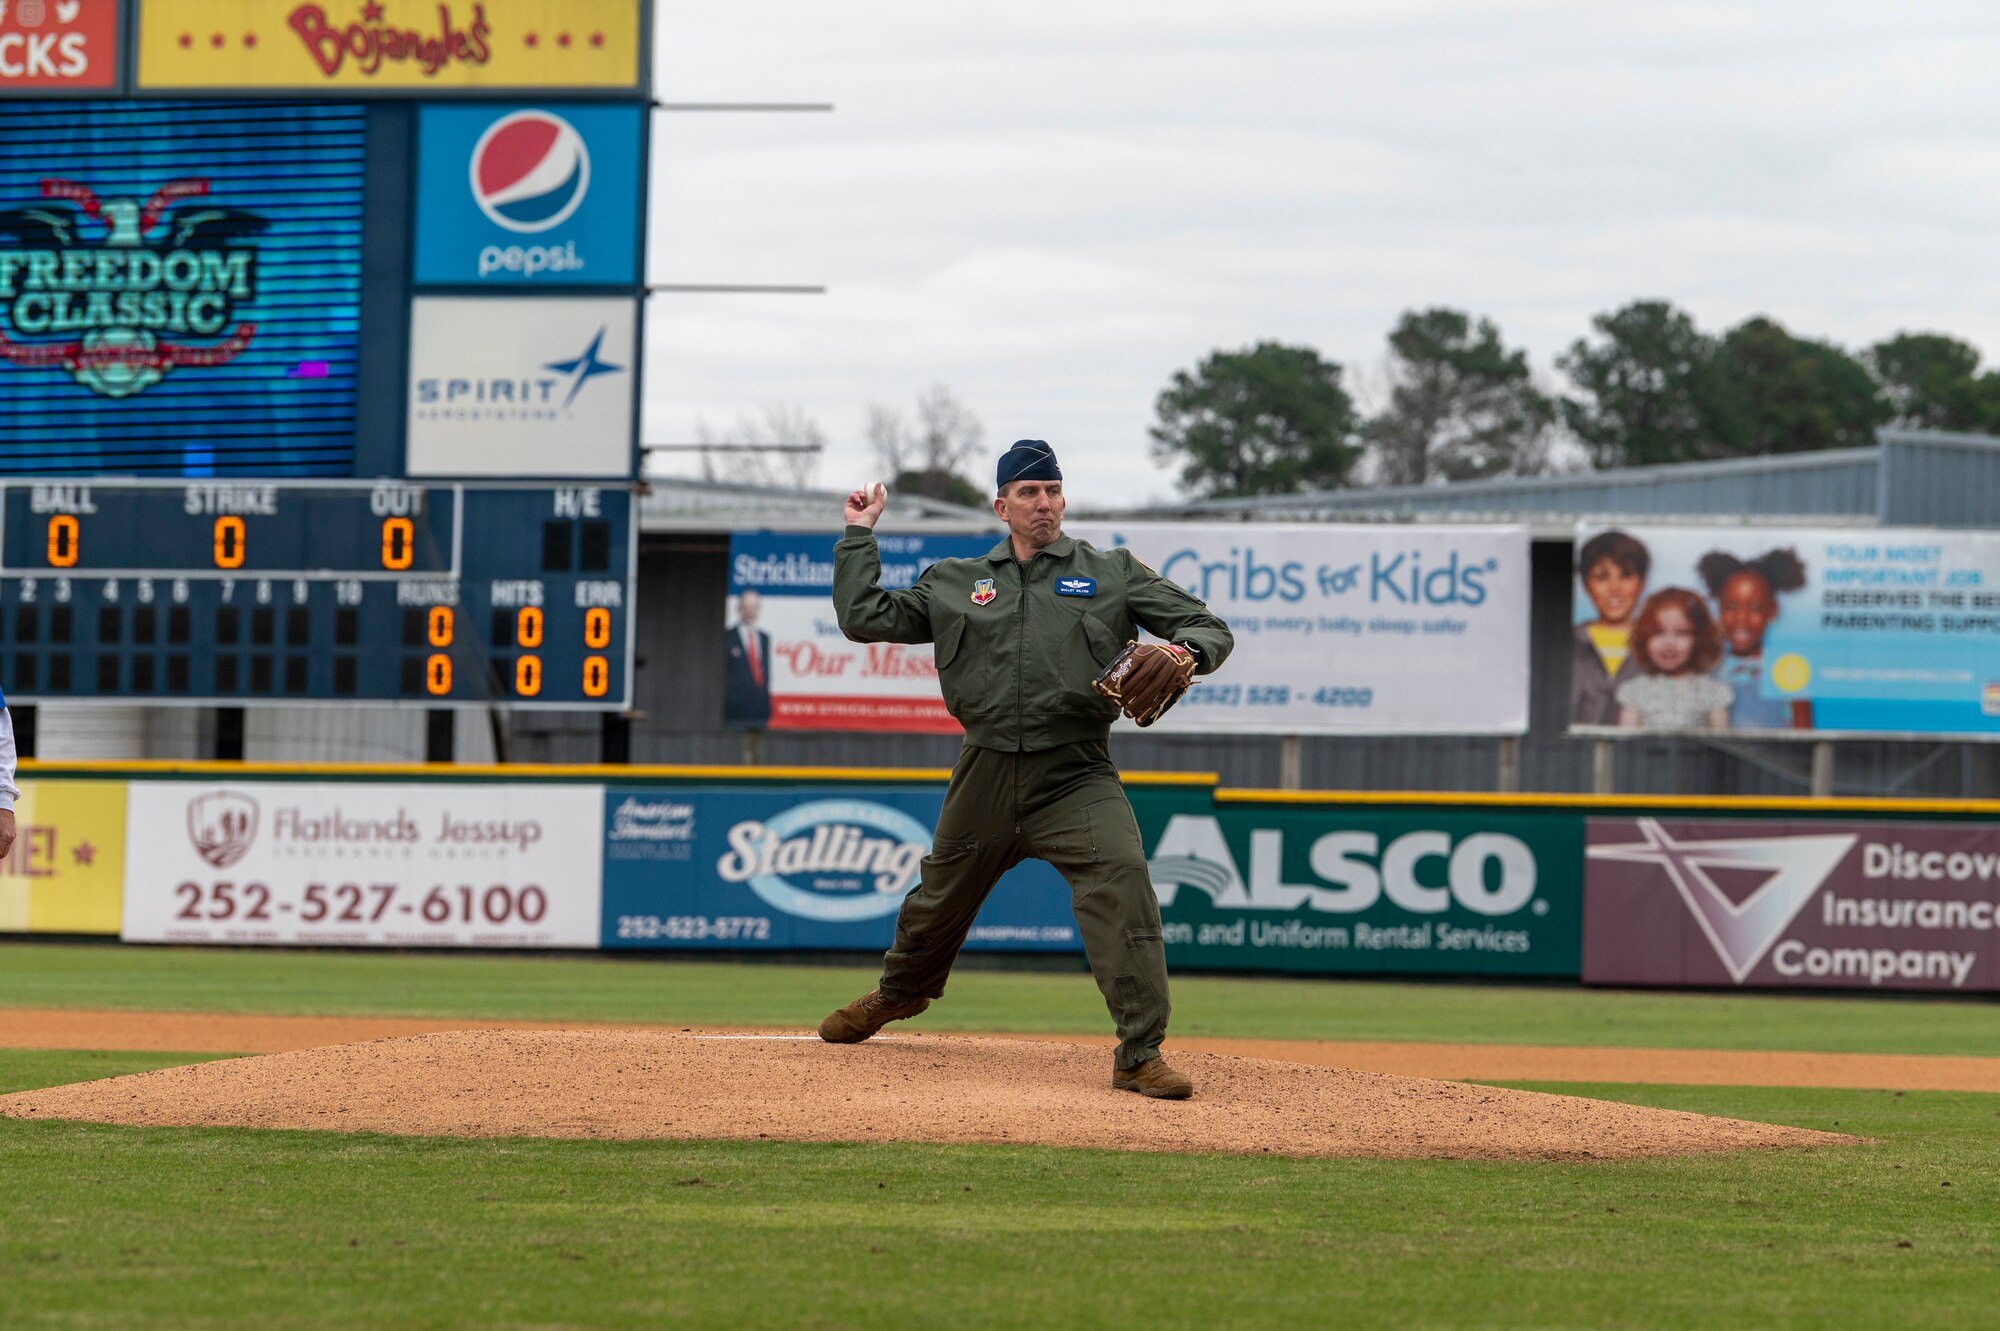 Col. Bryce Silver, 4th Fighter Wing vice commander, throws the first pitch during the 12th Annual Freedom Classic baseball series at Grainger Stadium in Kinston, North Carolina, Feb. 26, 2022. The first pitch is a long-standing tradition of baseball, in which a guest of honor throws a ball to mark the end of pregame festivities and the start of the game. (U.S. Air Force photo by Airman 1st Class Kevin Holloway)